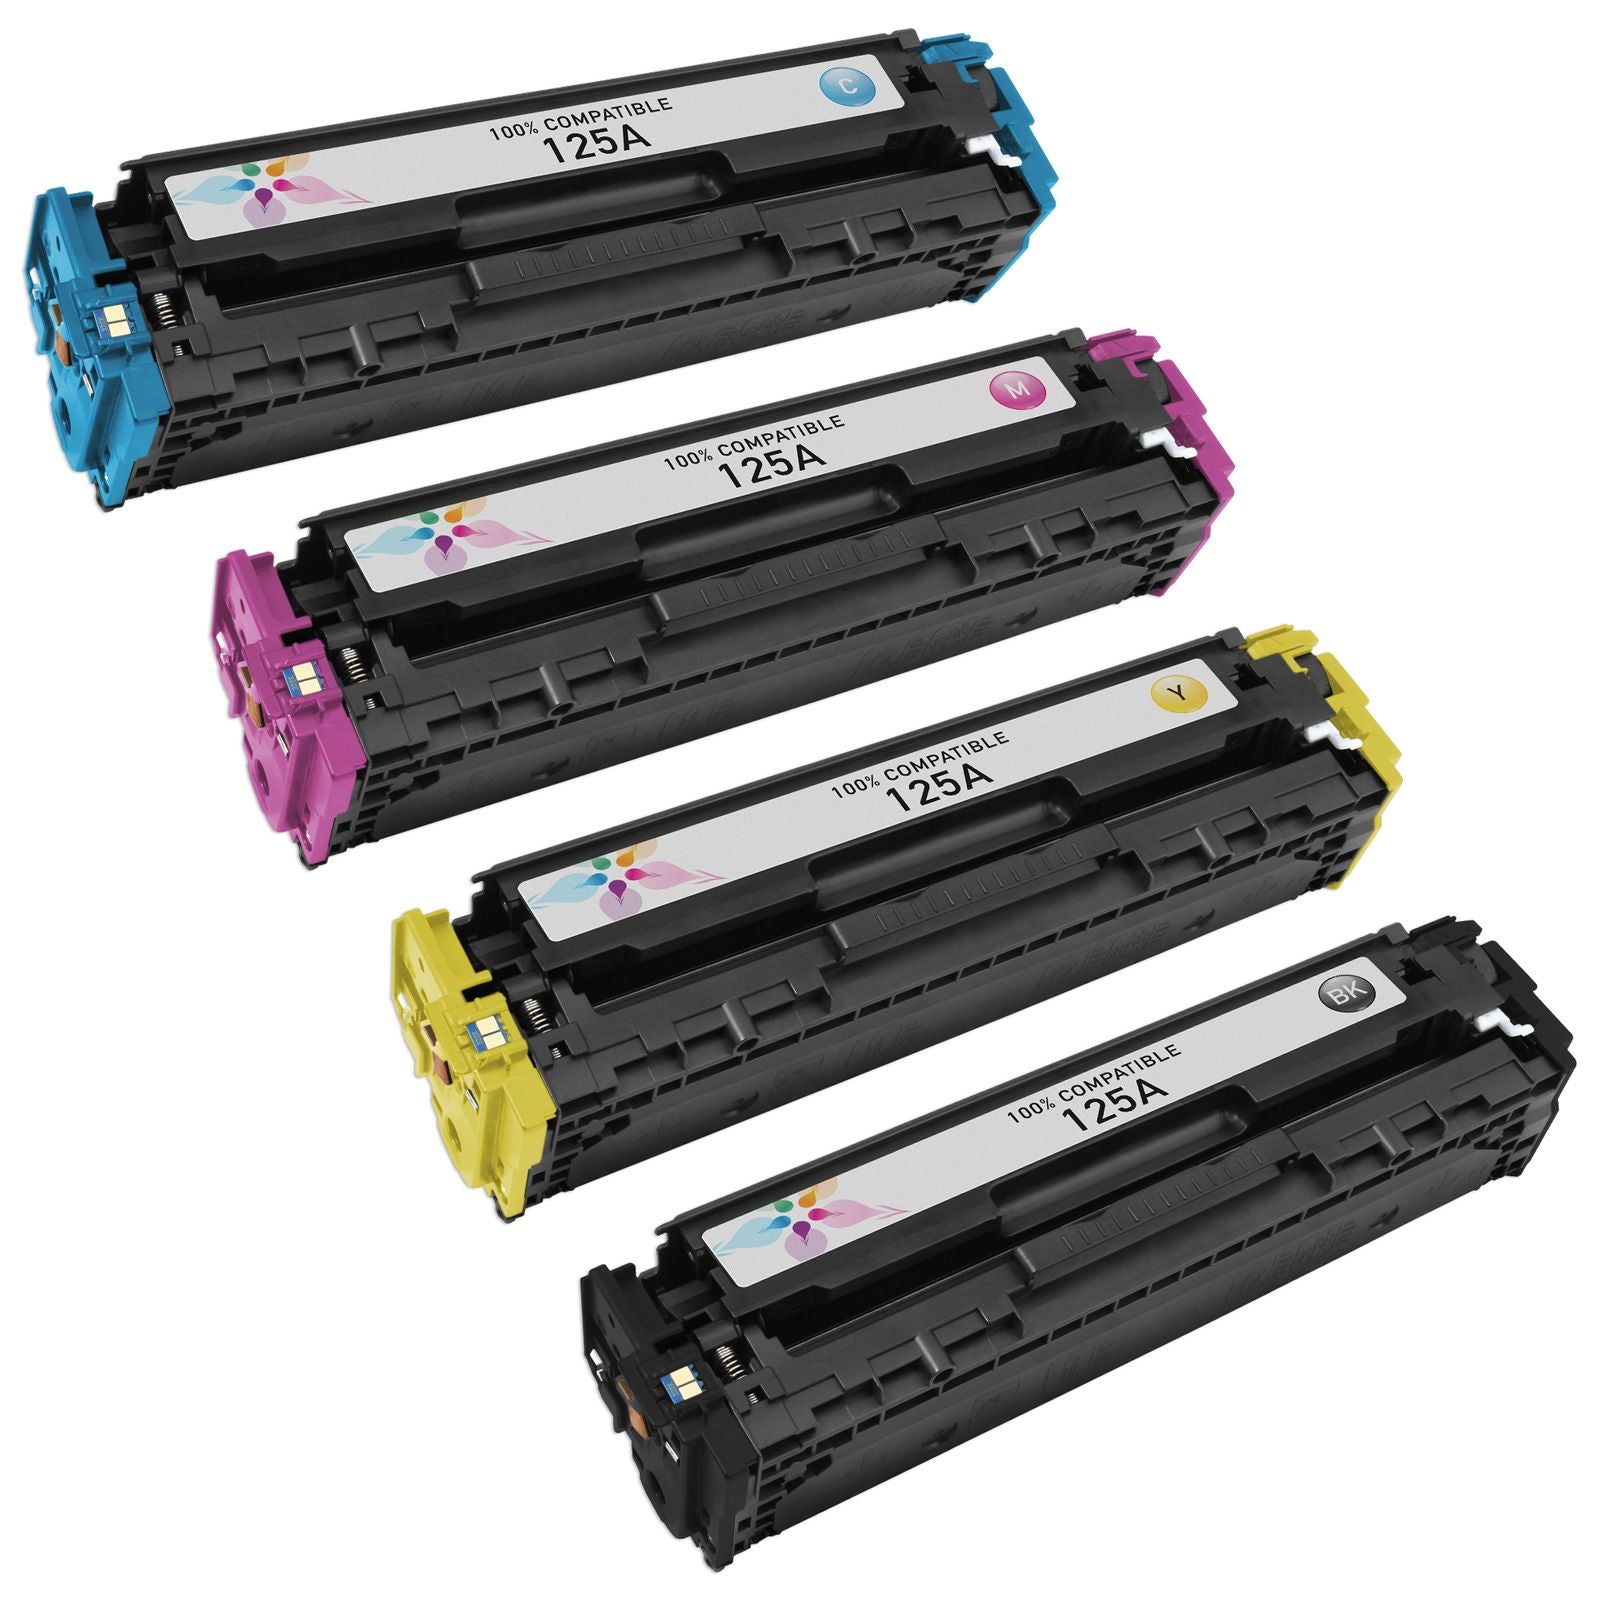 IMPERIAL BRAND Compatible toner cartridge for HP 125A MULTIPACK BJ,C,M,Y LASER TONER 2200 PAGES